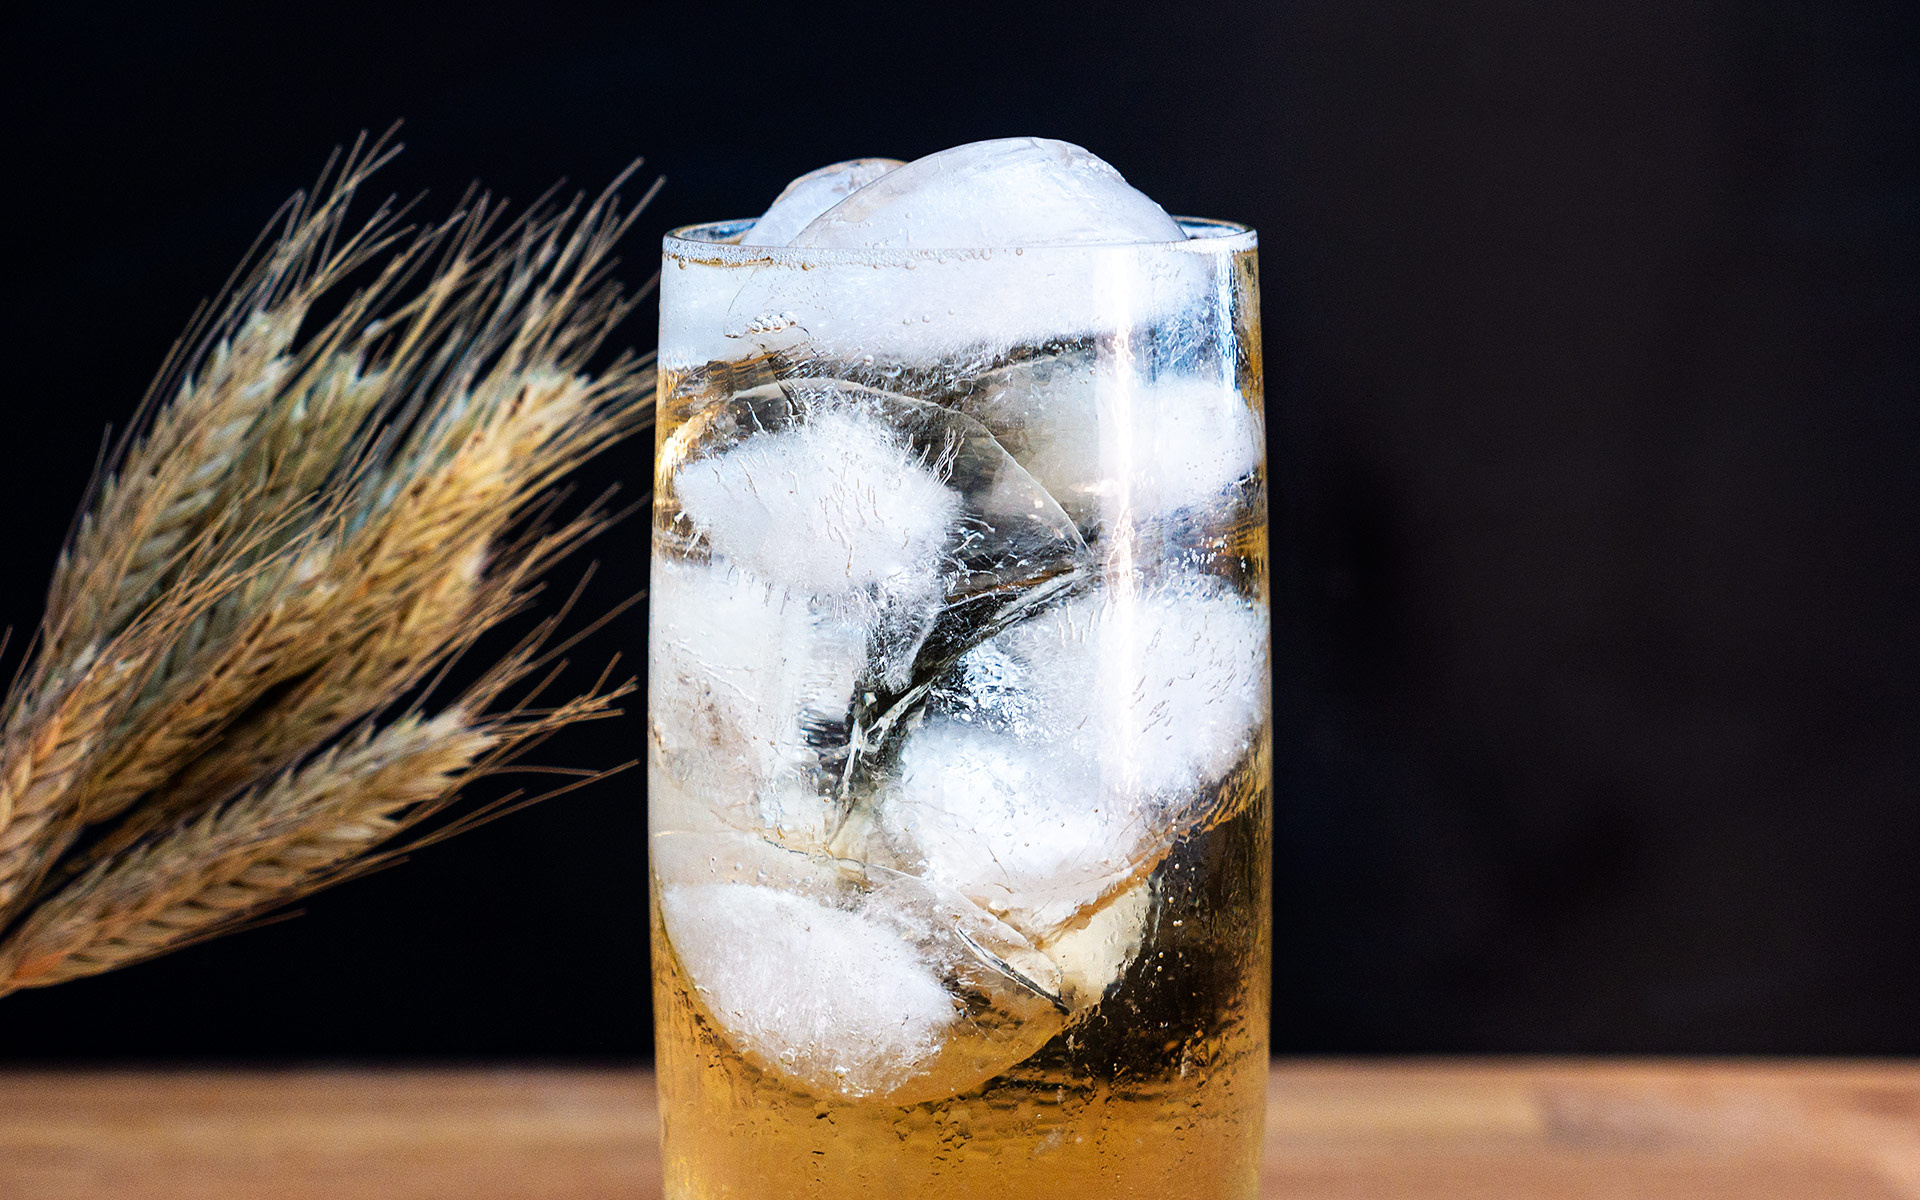 Whisky soda cocktail, Classic highball drink, Refreshing beverage, Whisky and soda, 1920x1200 HD Desktop